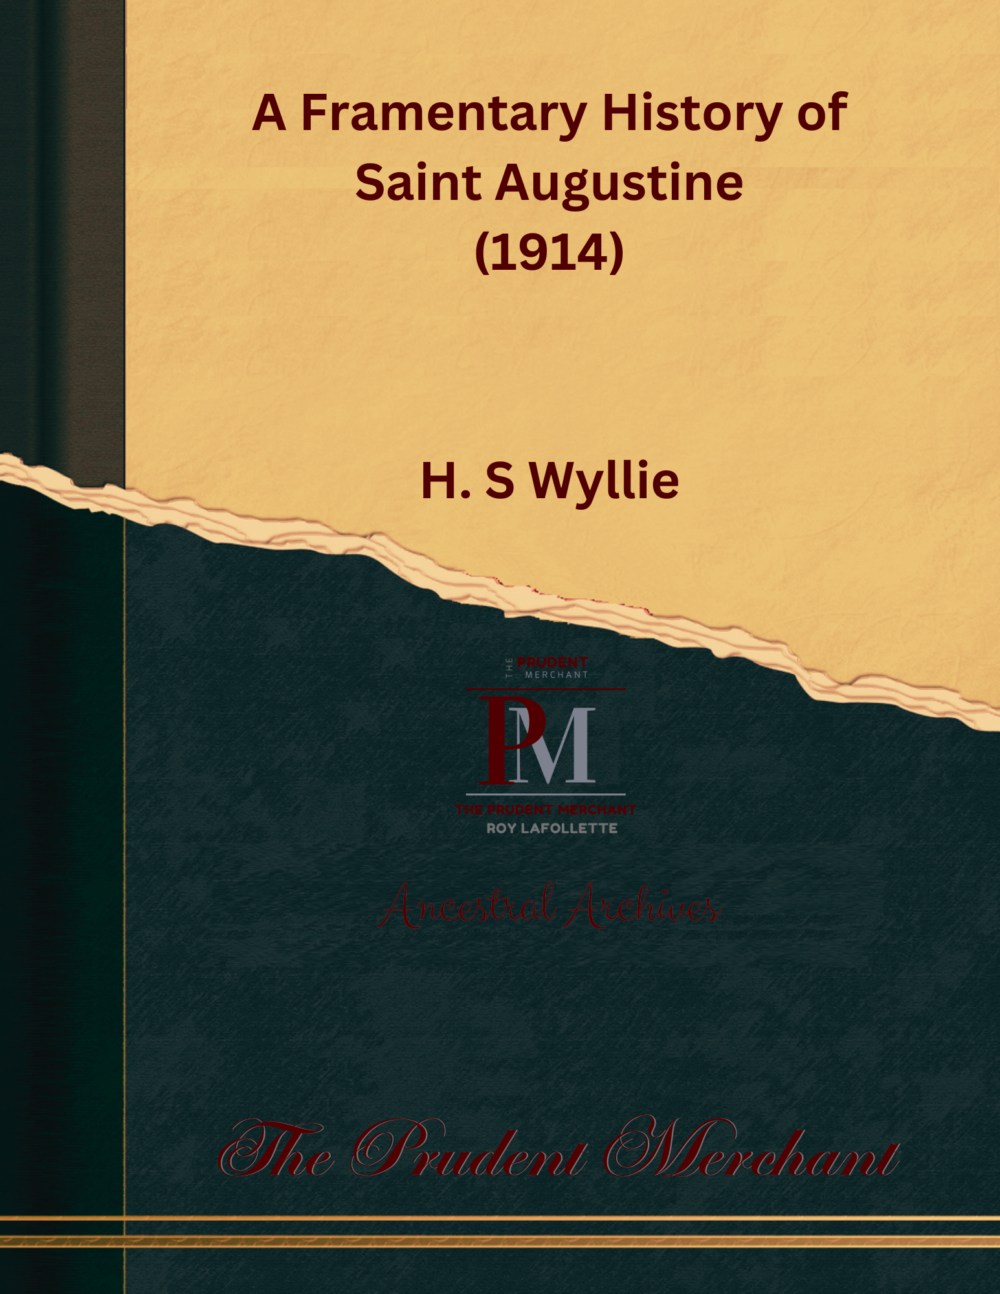 A Fragmentary History of Saint Augustine (1914) by H. S. Wyllie